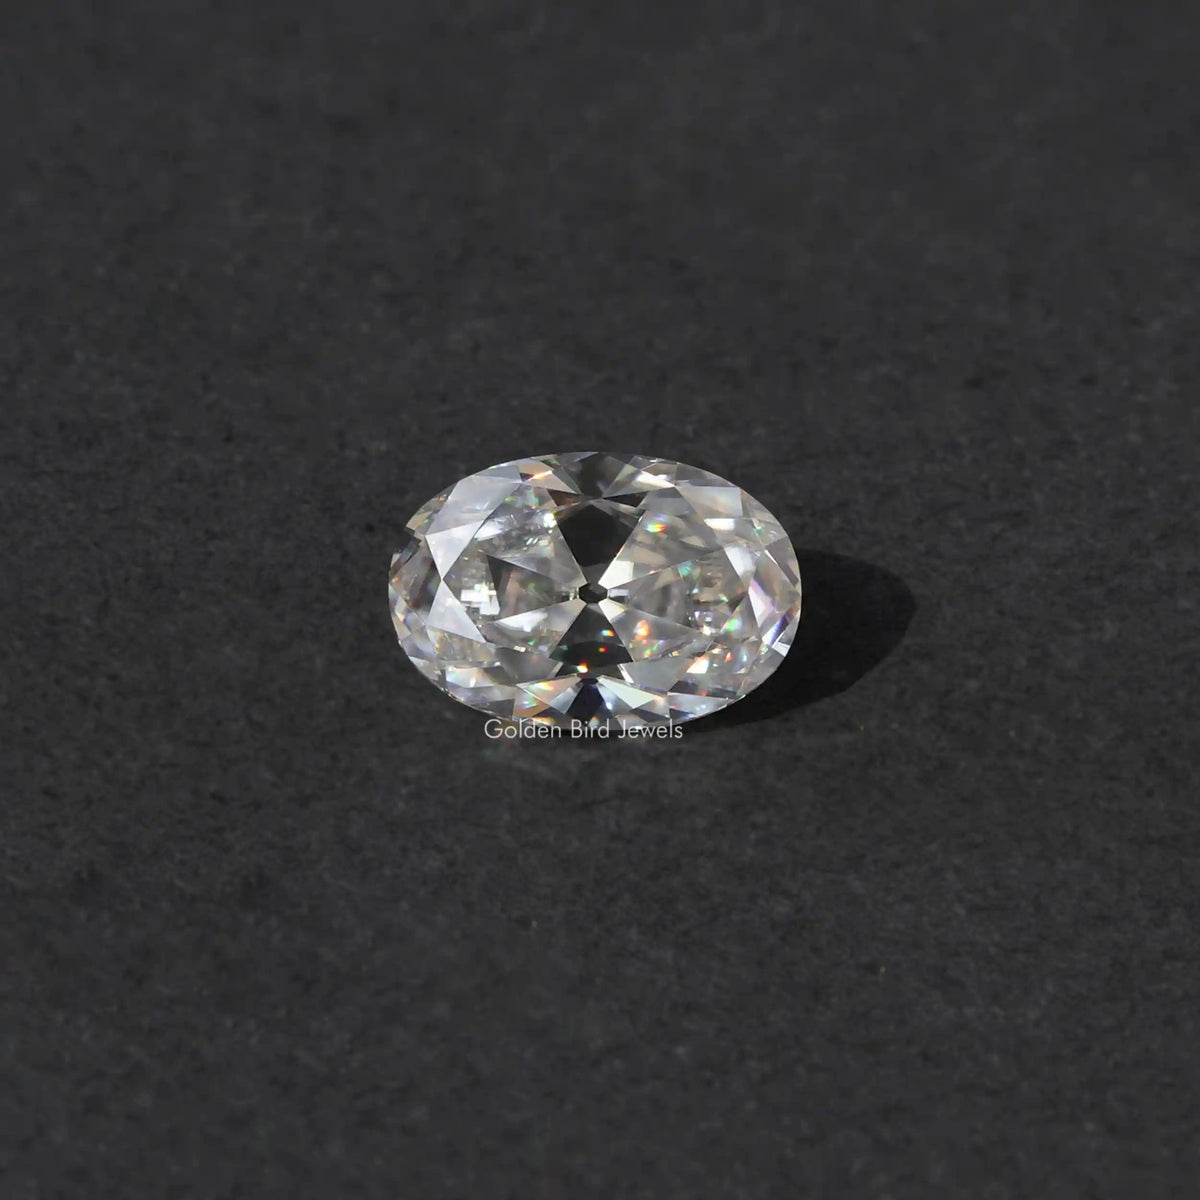 Colorless Old Mine Oval Moissanite Loose Stone